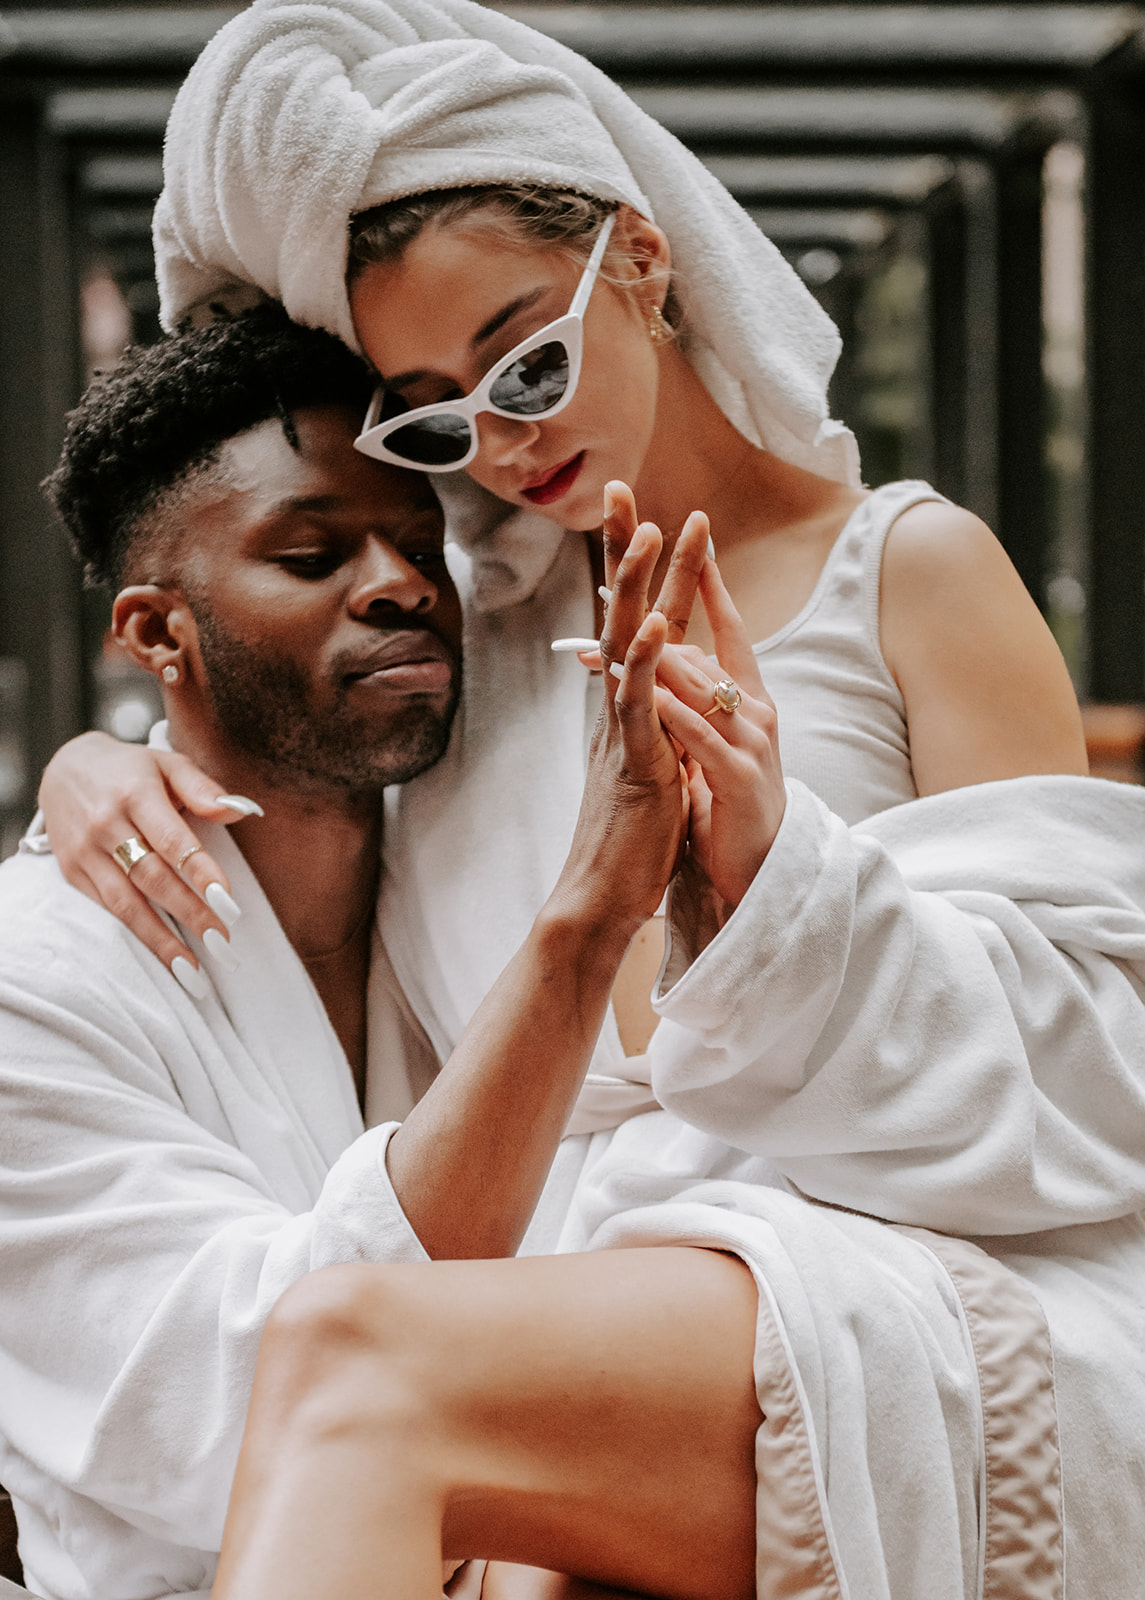 Couple embracing and Intertwining their hands. Wearing robes and she has a towel on her head and white sunglasses